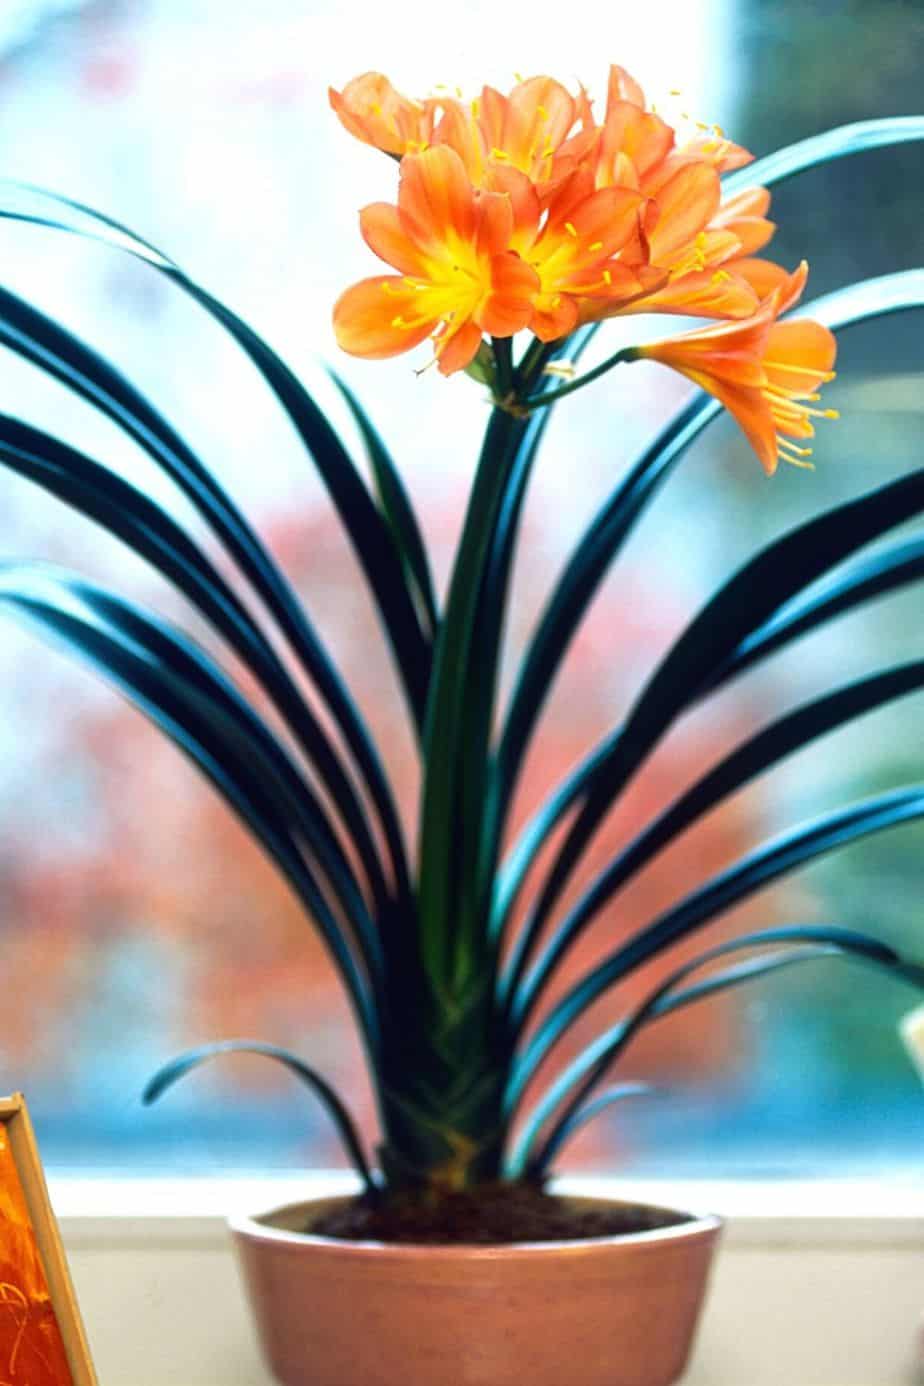 A plant that looks similar to Amaryllis, Clivia is a known toxic plant to cats